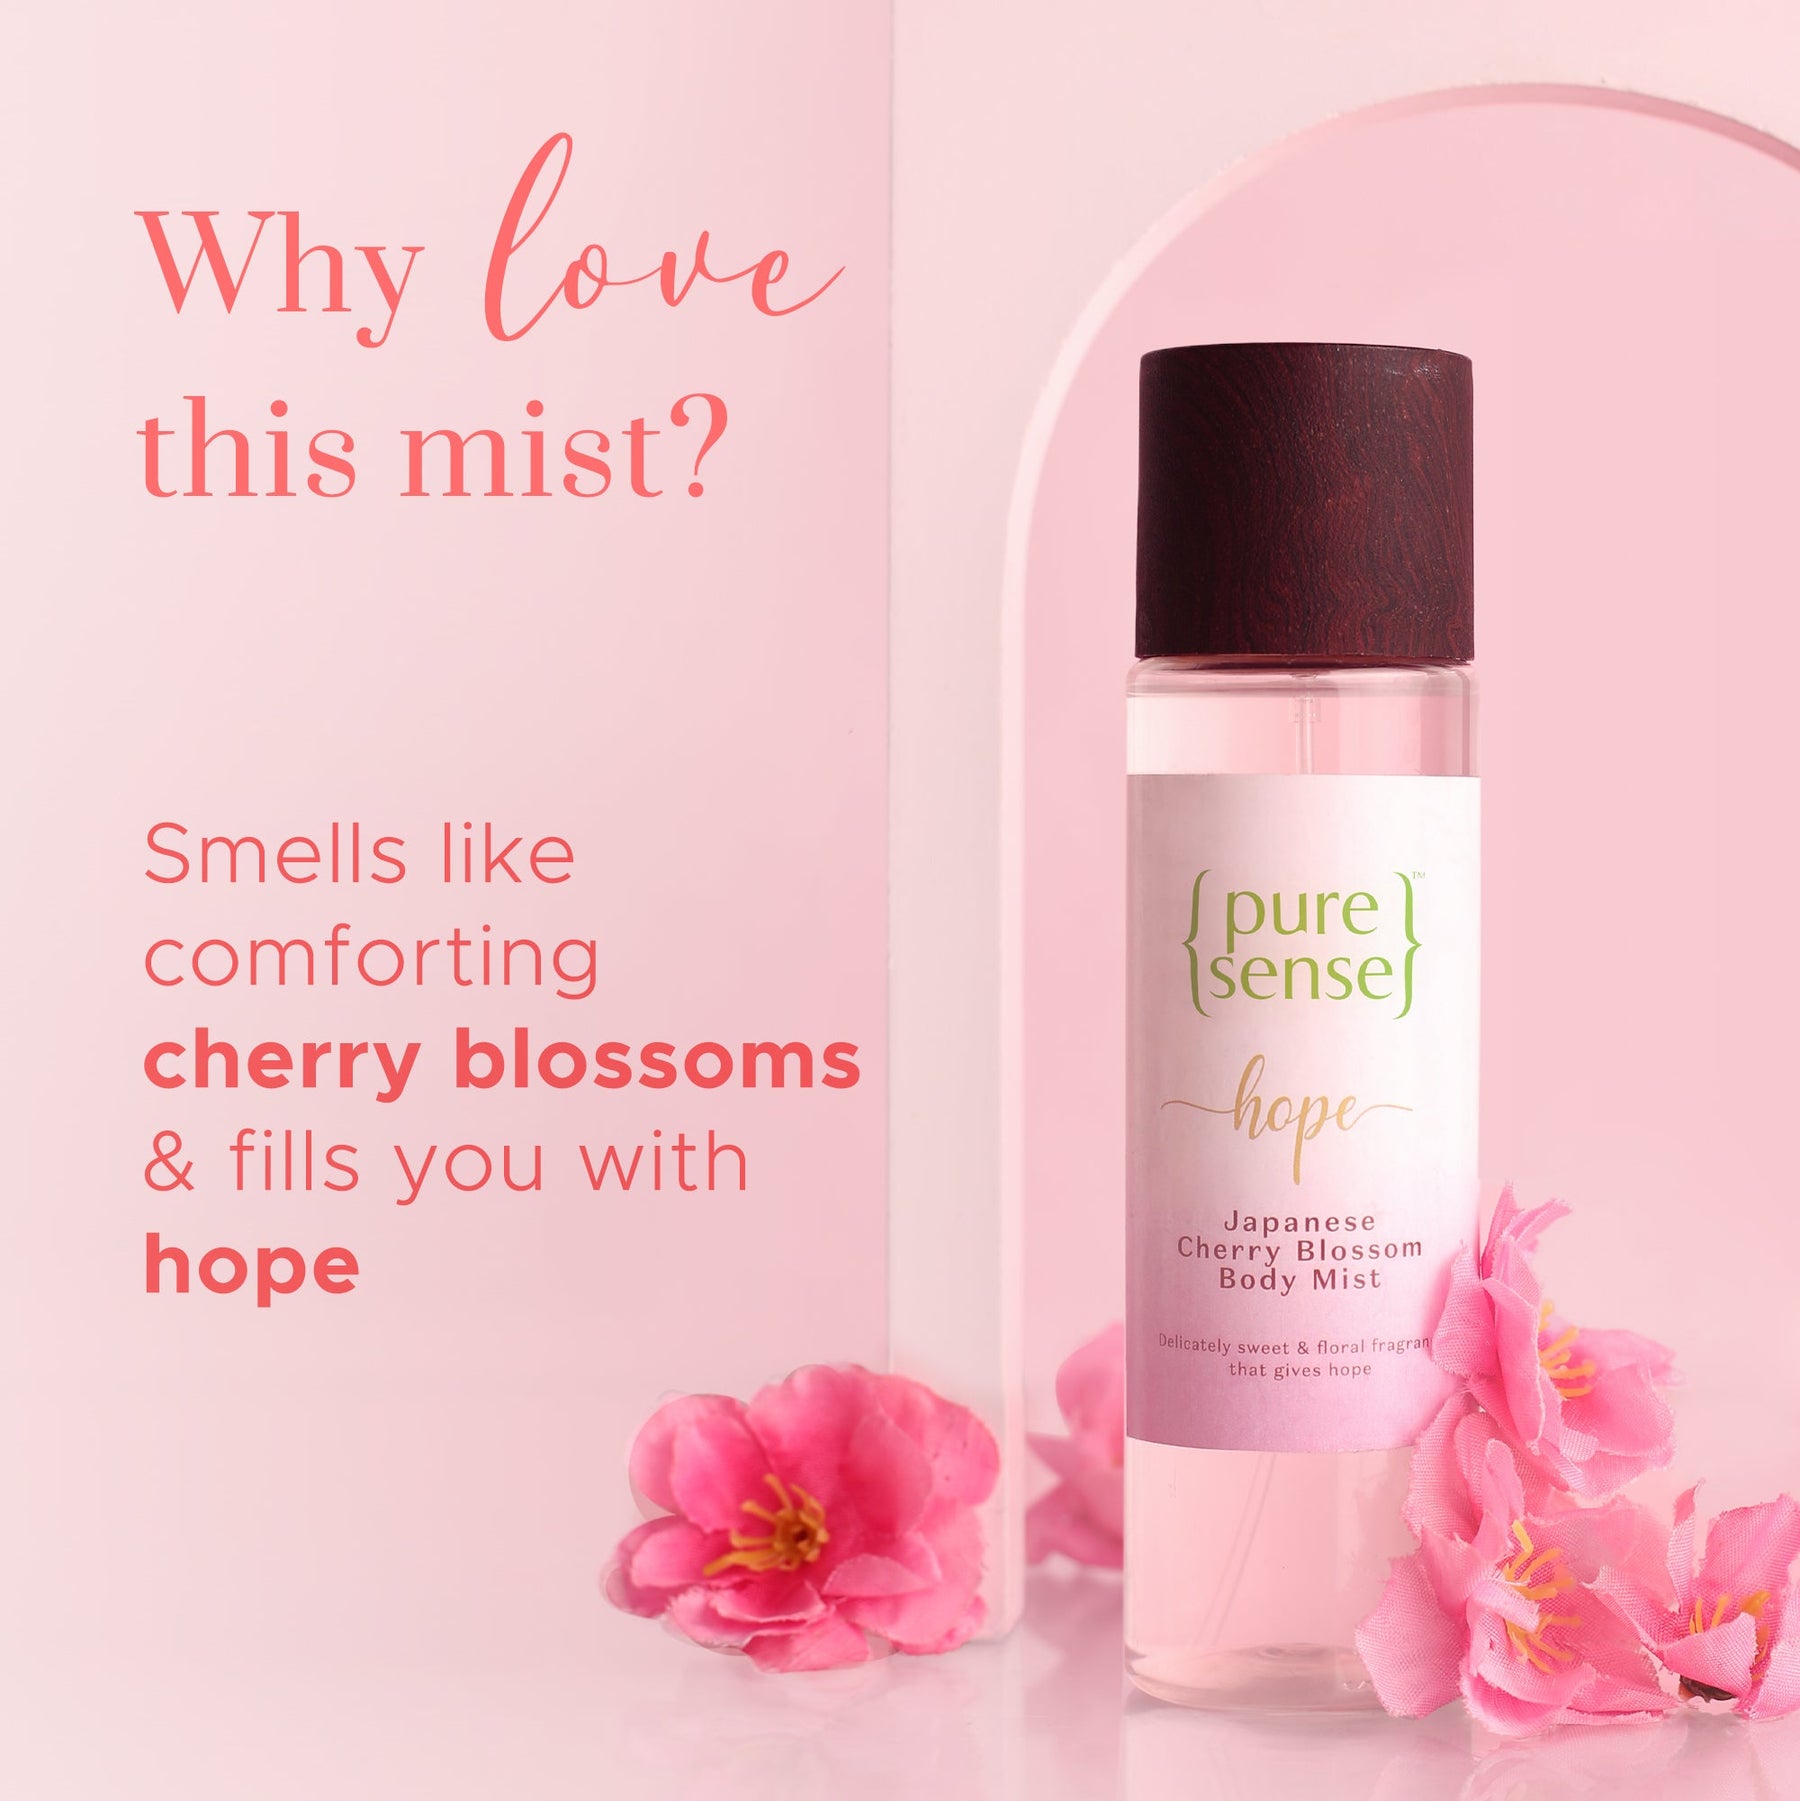 [CRED] Hope Japanese Cherry Blossom Body Mist | From the makers of Parachute Advansed | 150 ml